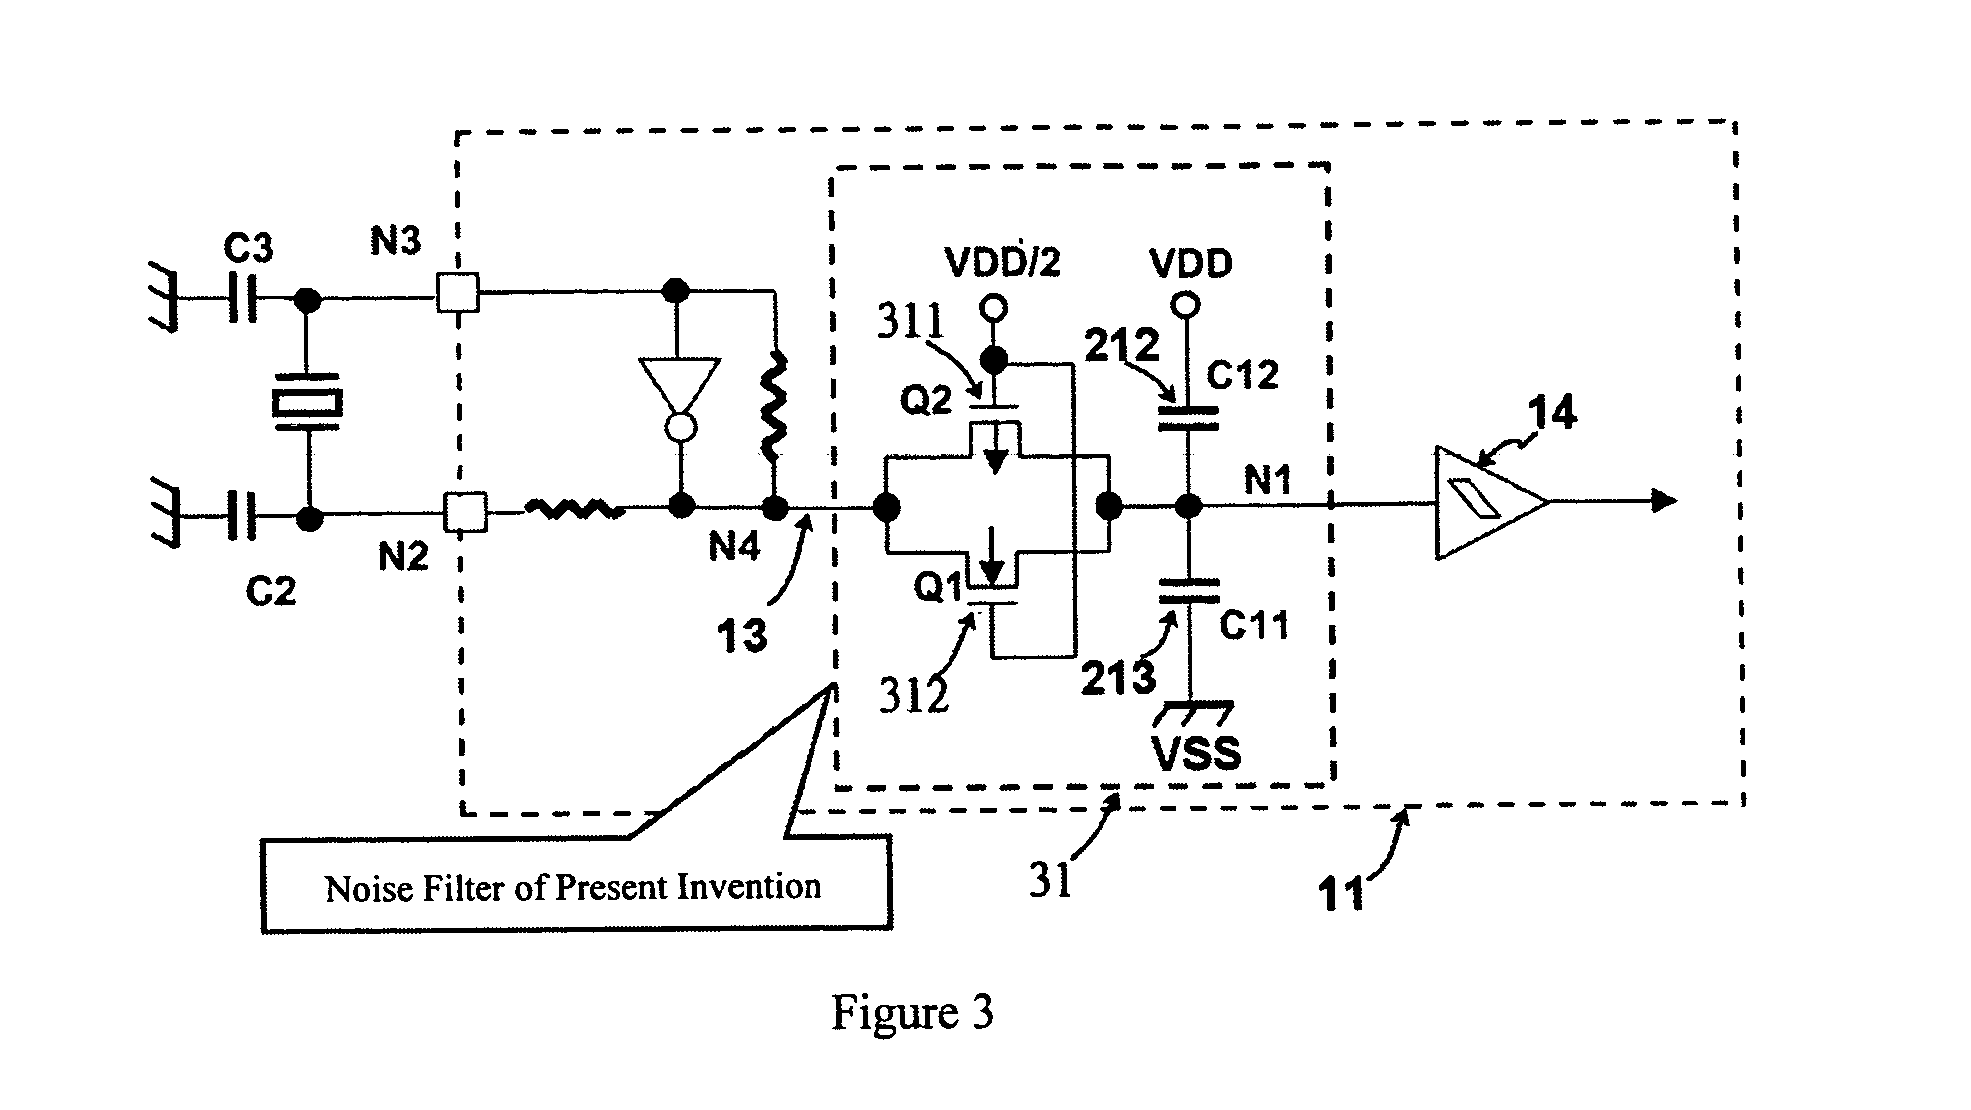 Noise filter for an integrated circuit